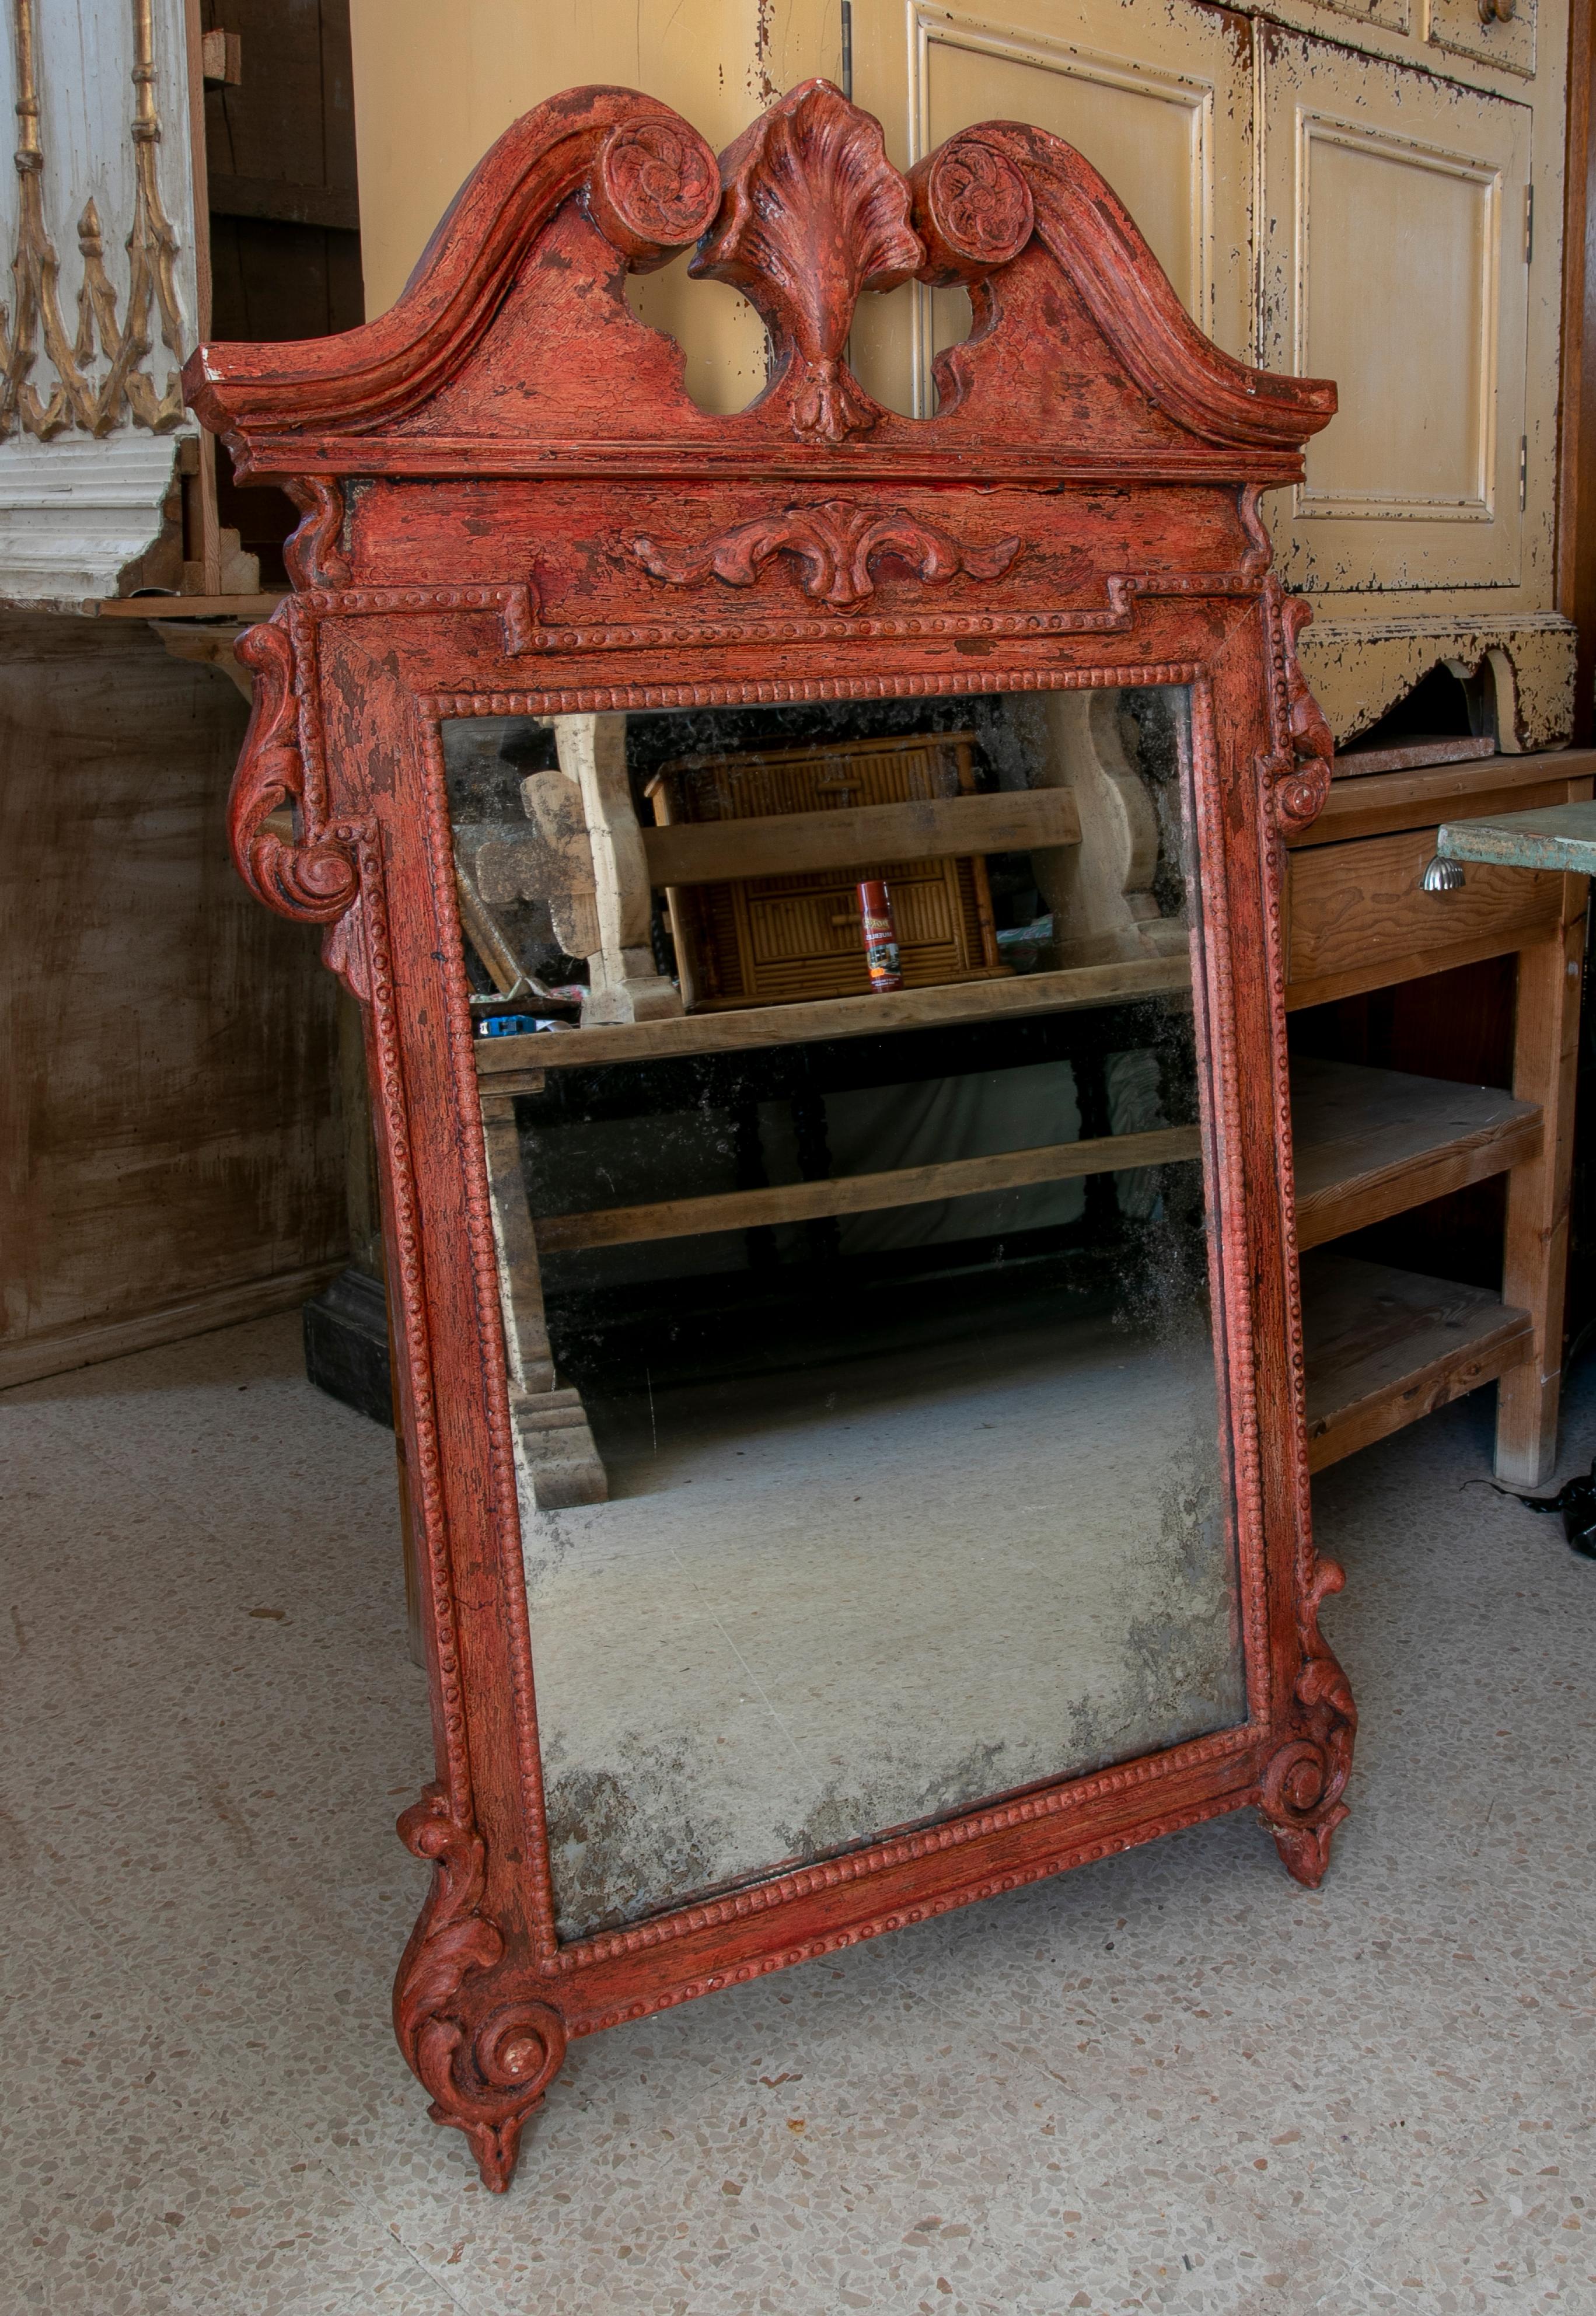 Handmade and carved wooden mirror in red colour.